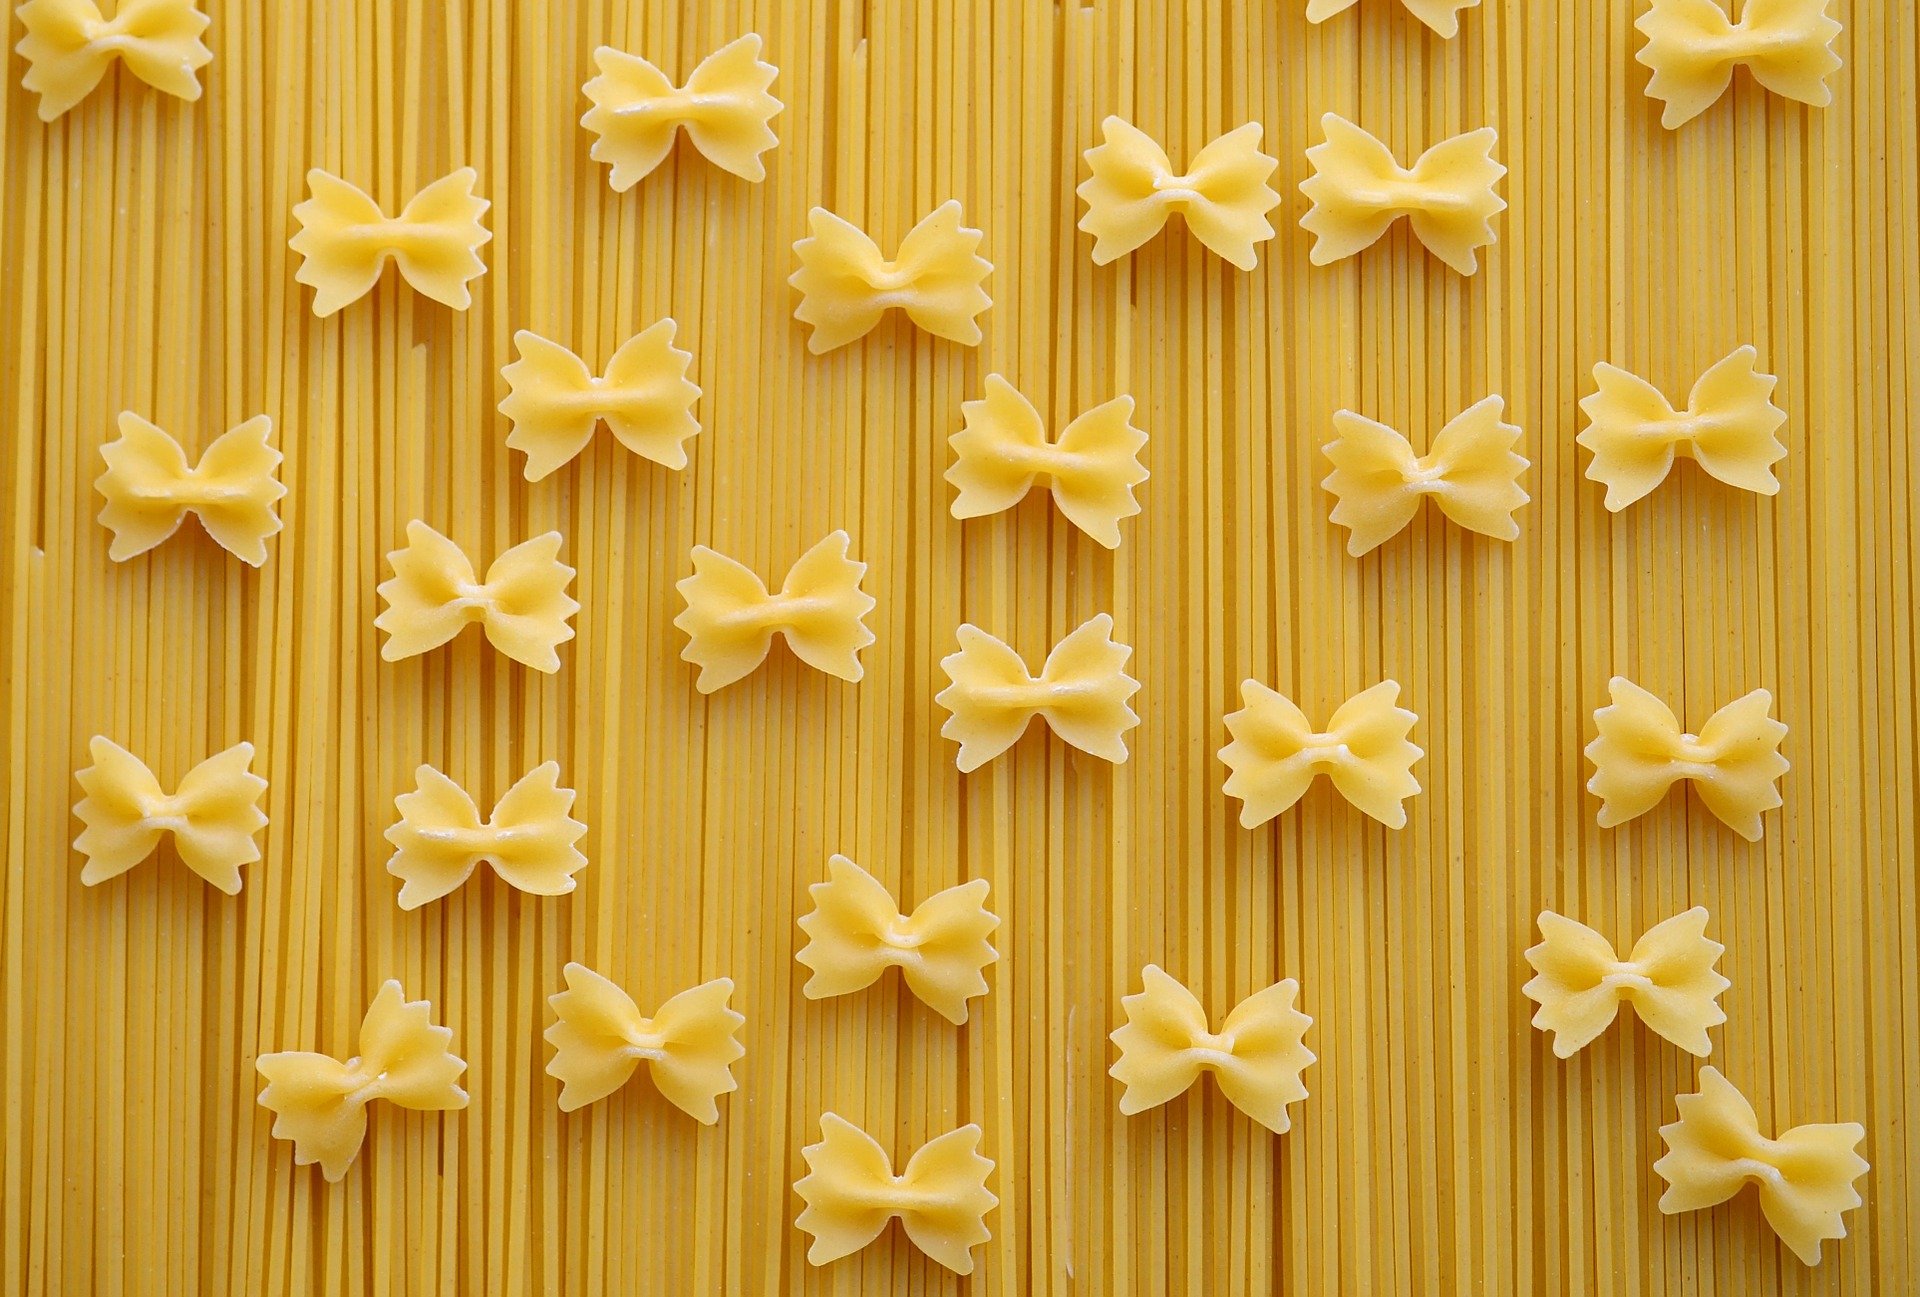 10 Things You Didn’t Know About Italian Pasta